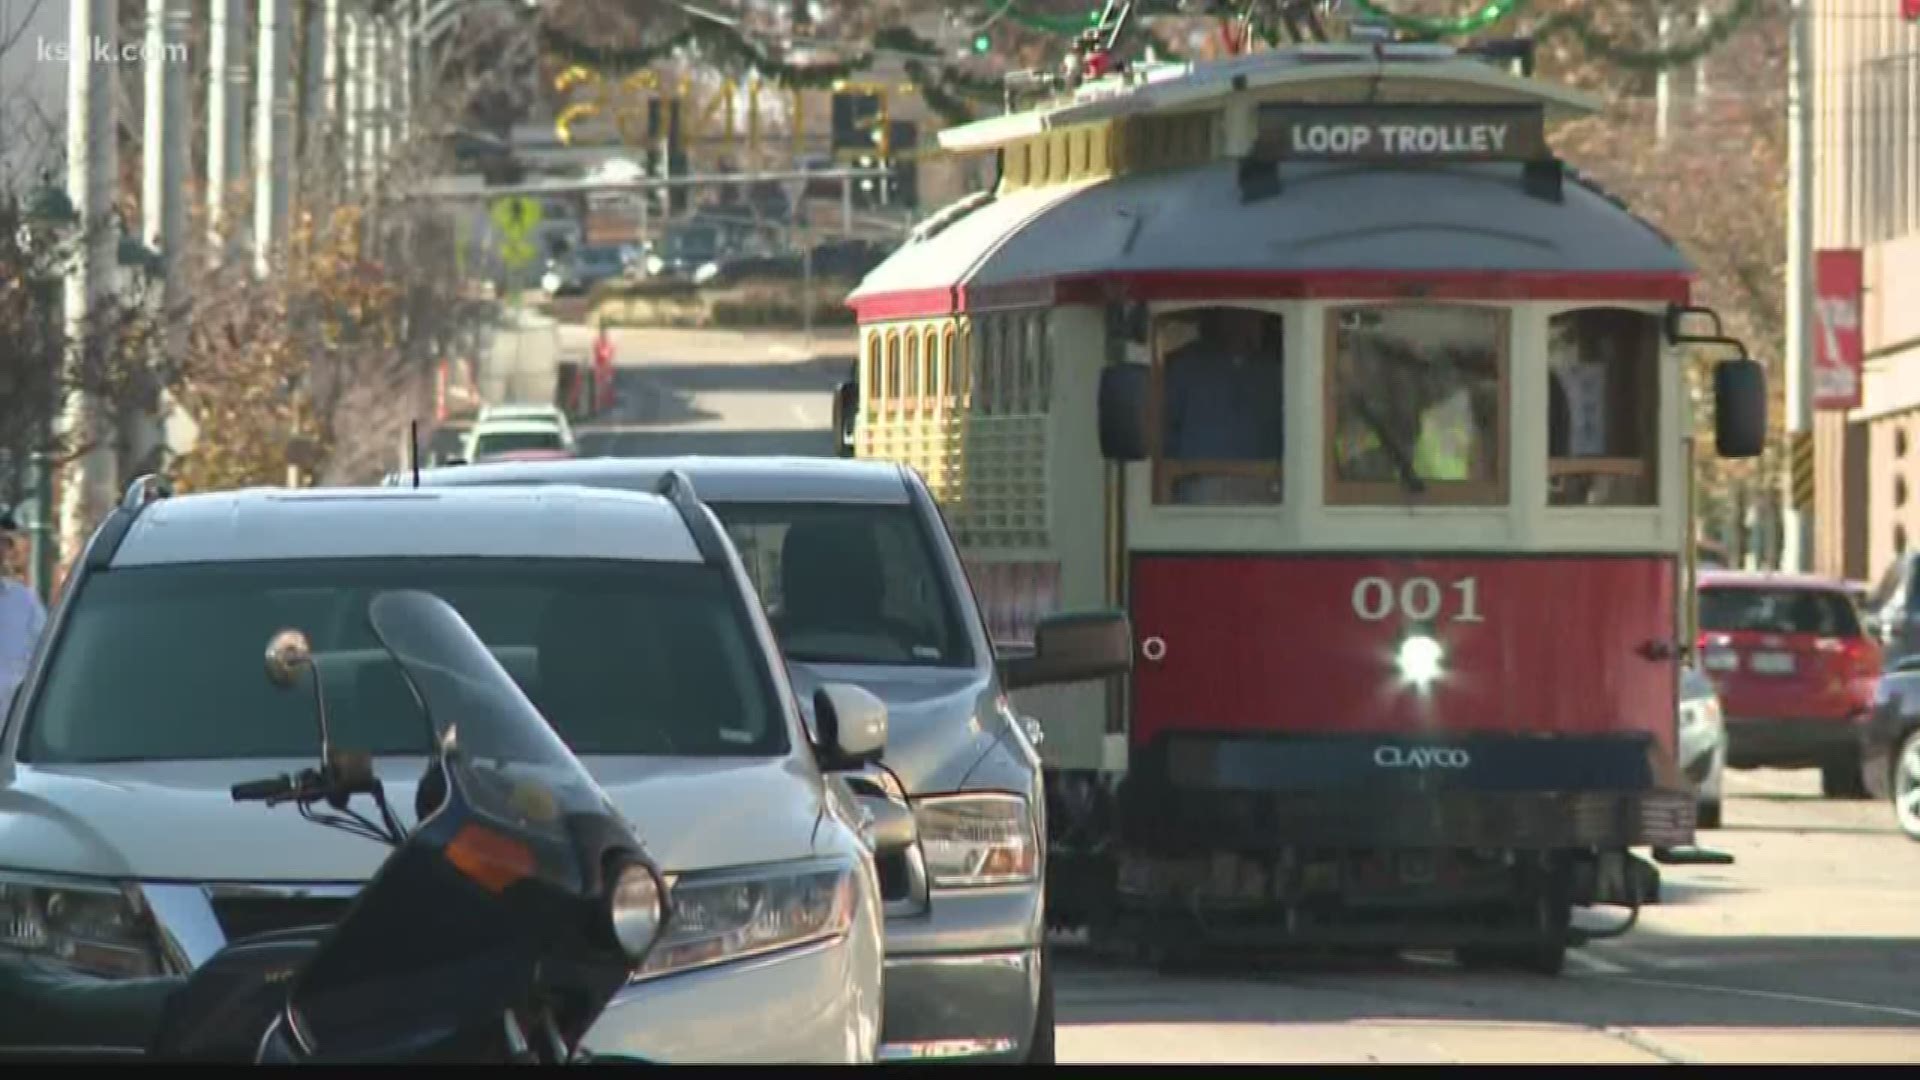 About $52 million of public and private funds have already been invested in the trolley system.